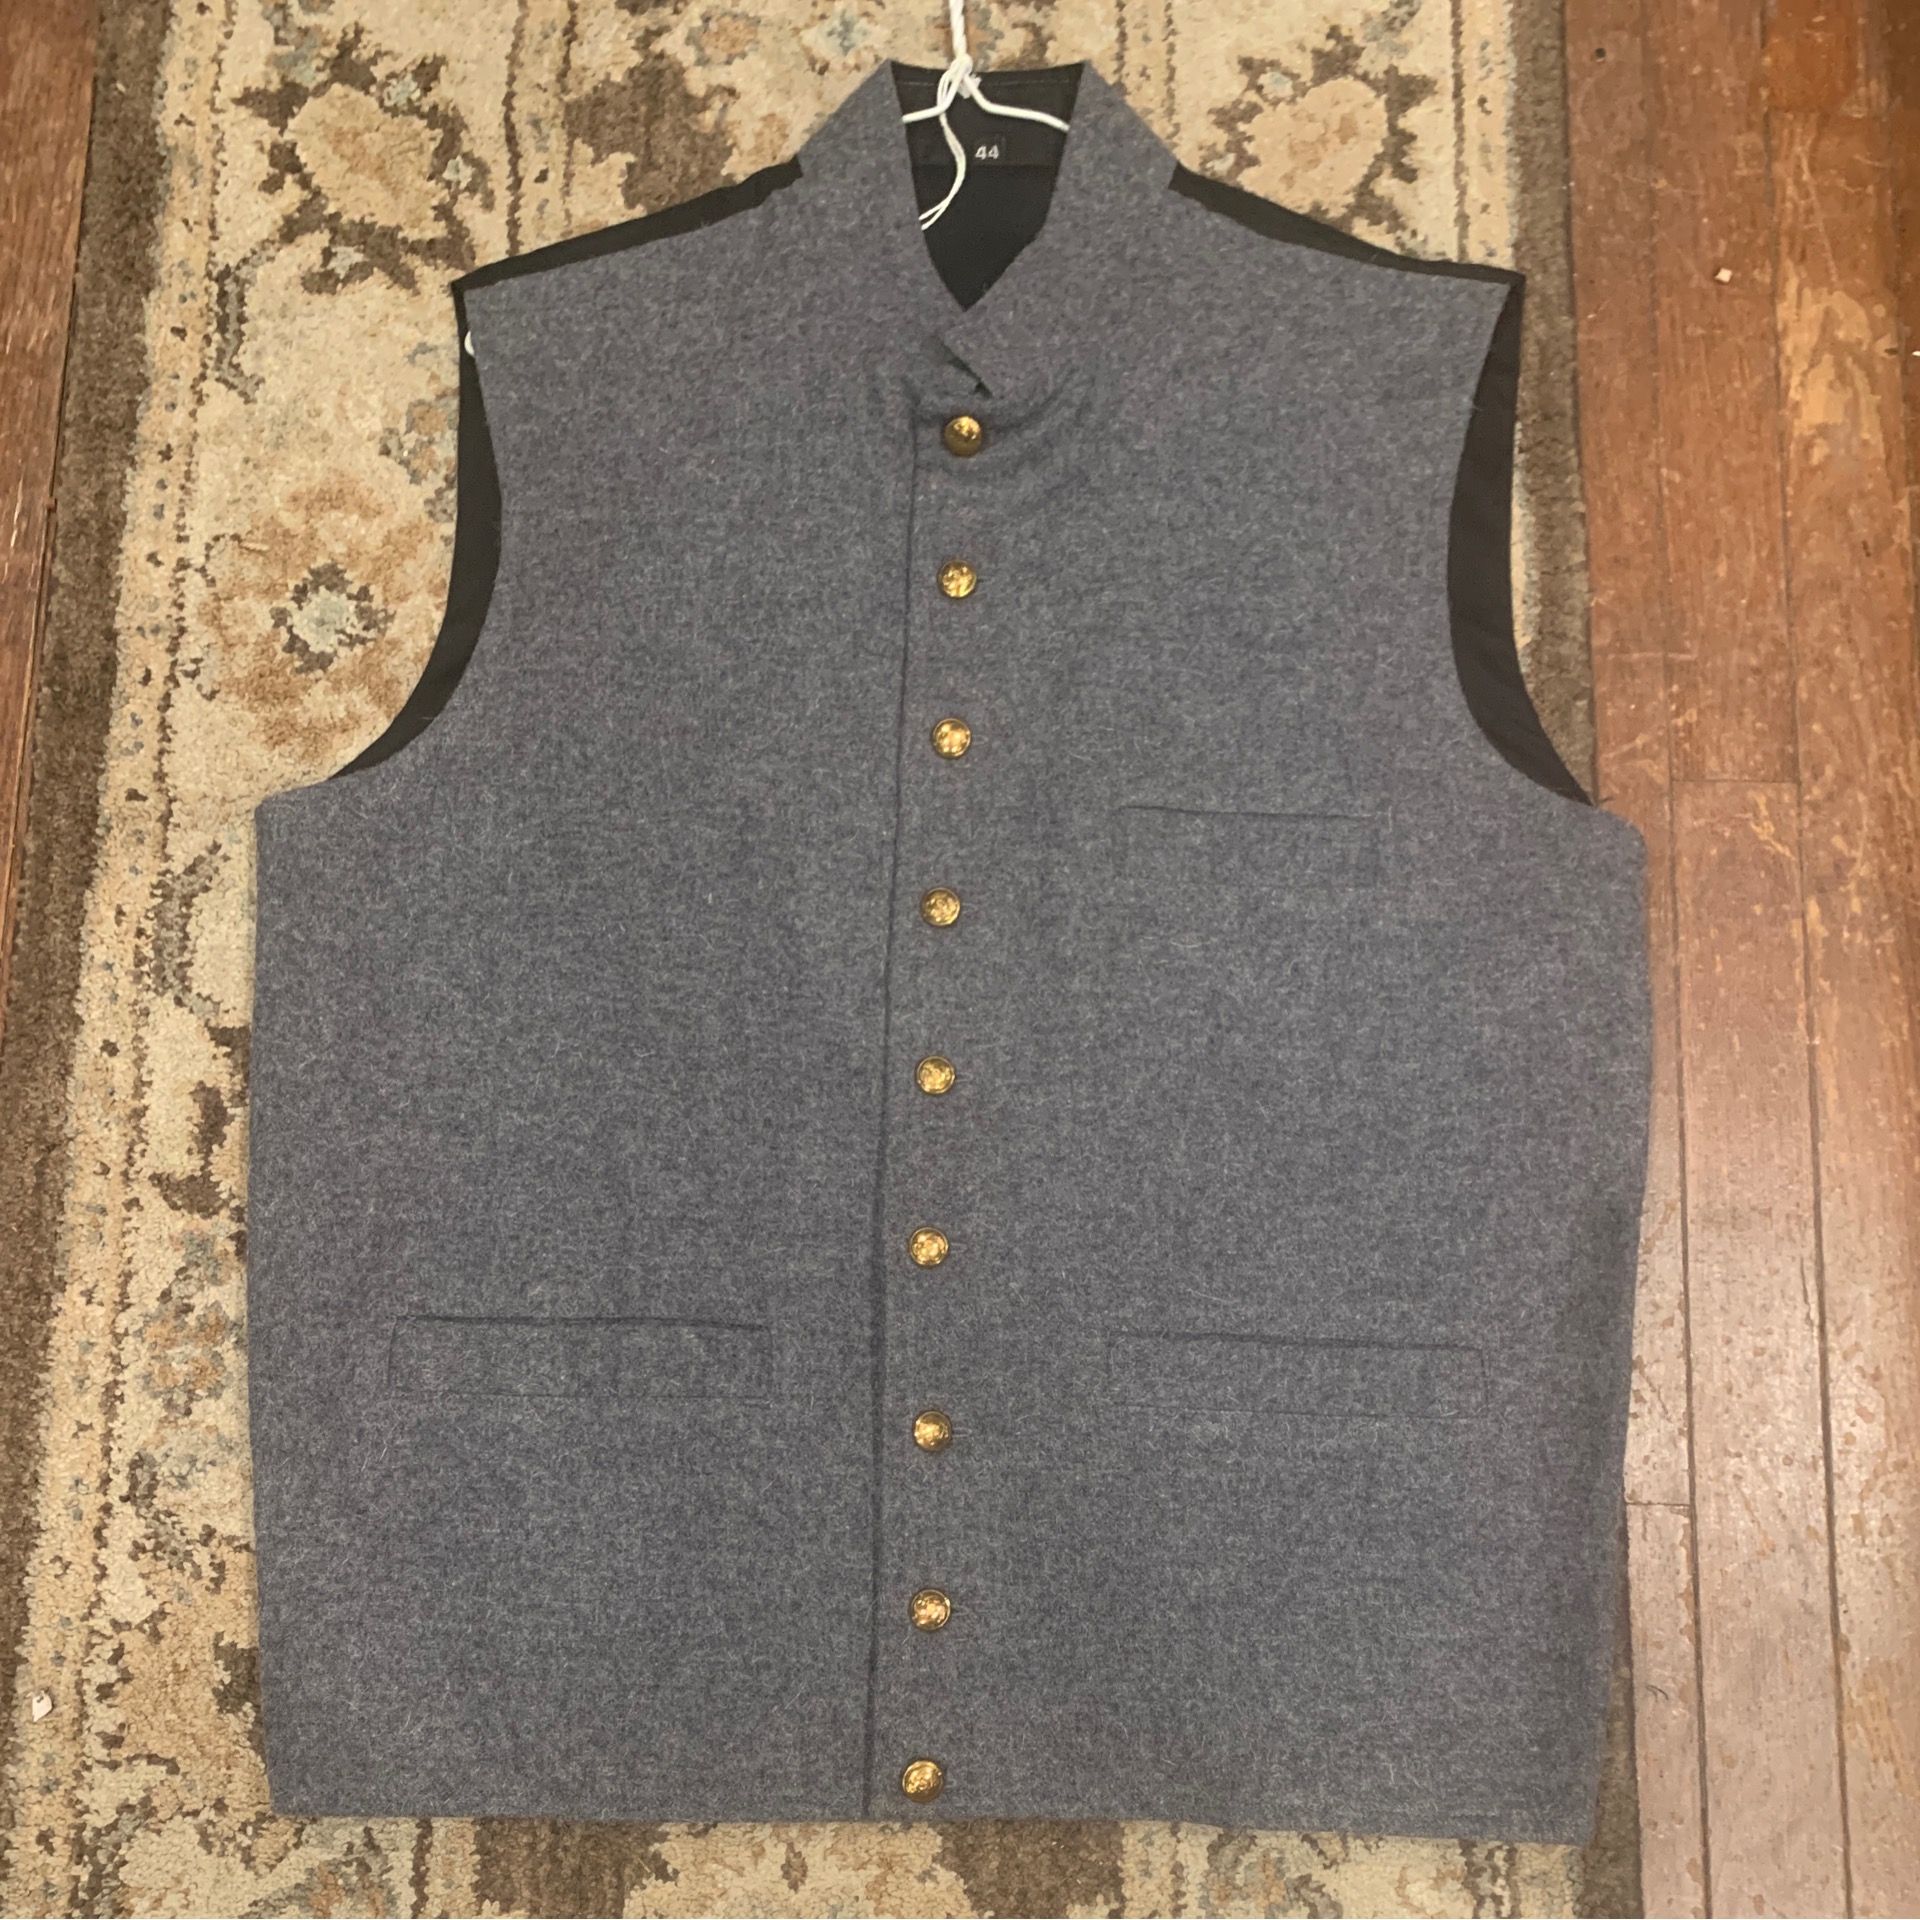 Vest, CS military in gray wool - The Maryland Sutler